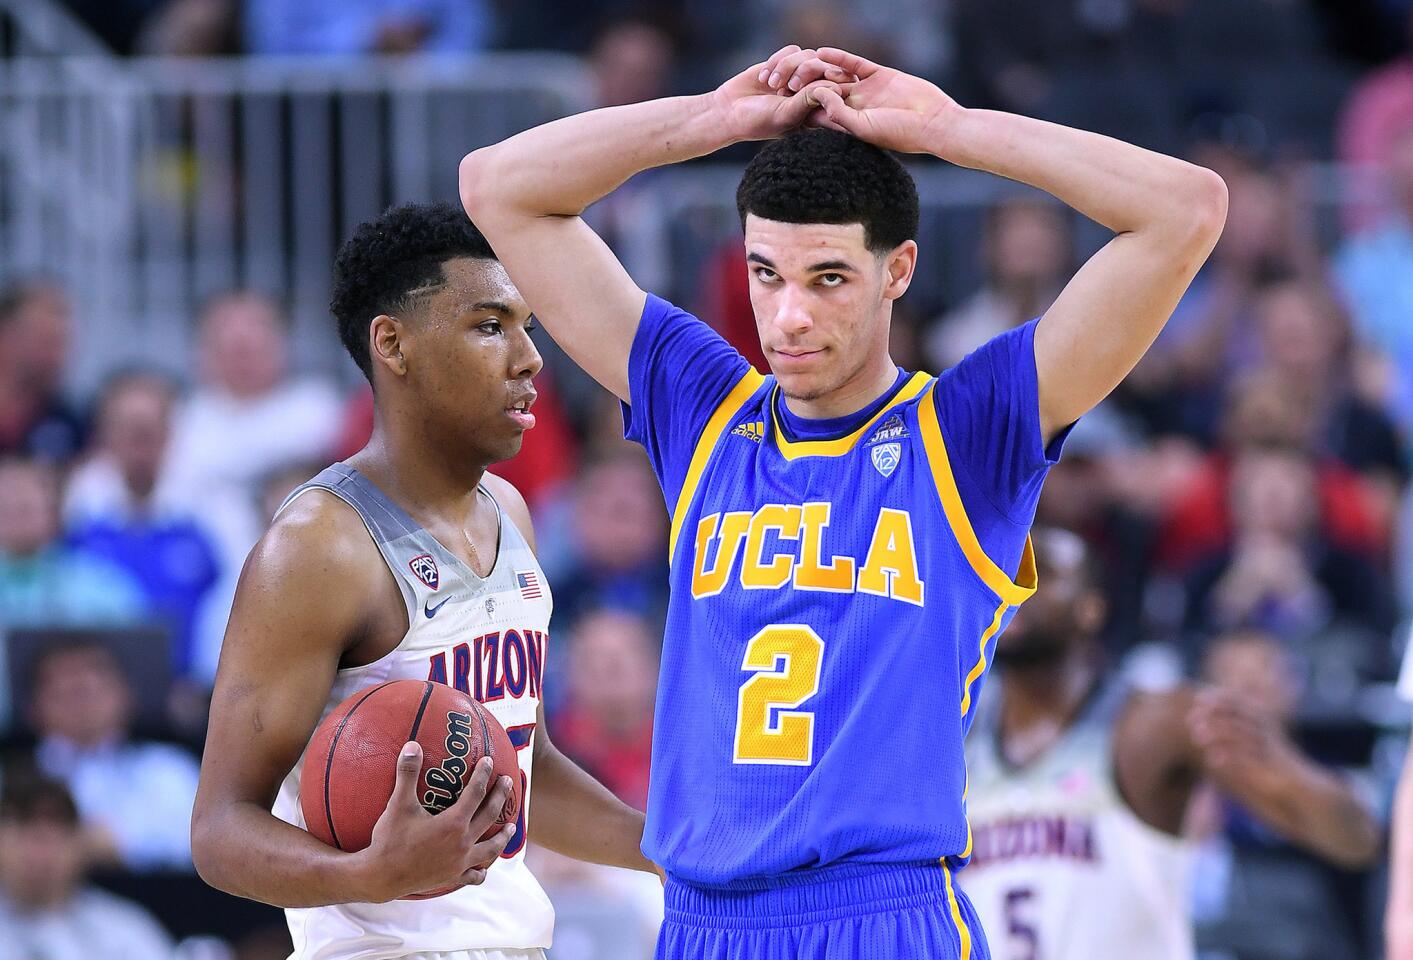 UCLA guard Lonzo Ball reacts after fouling Arizona guard Allonzo Trier during the second half.